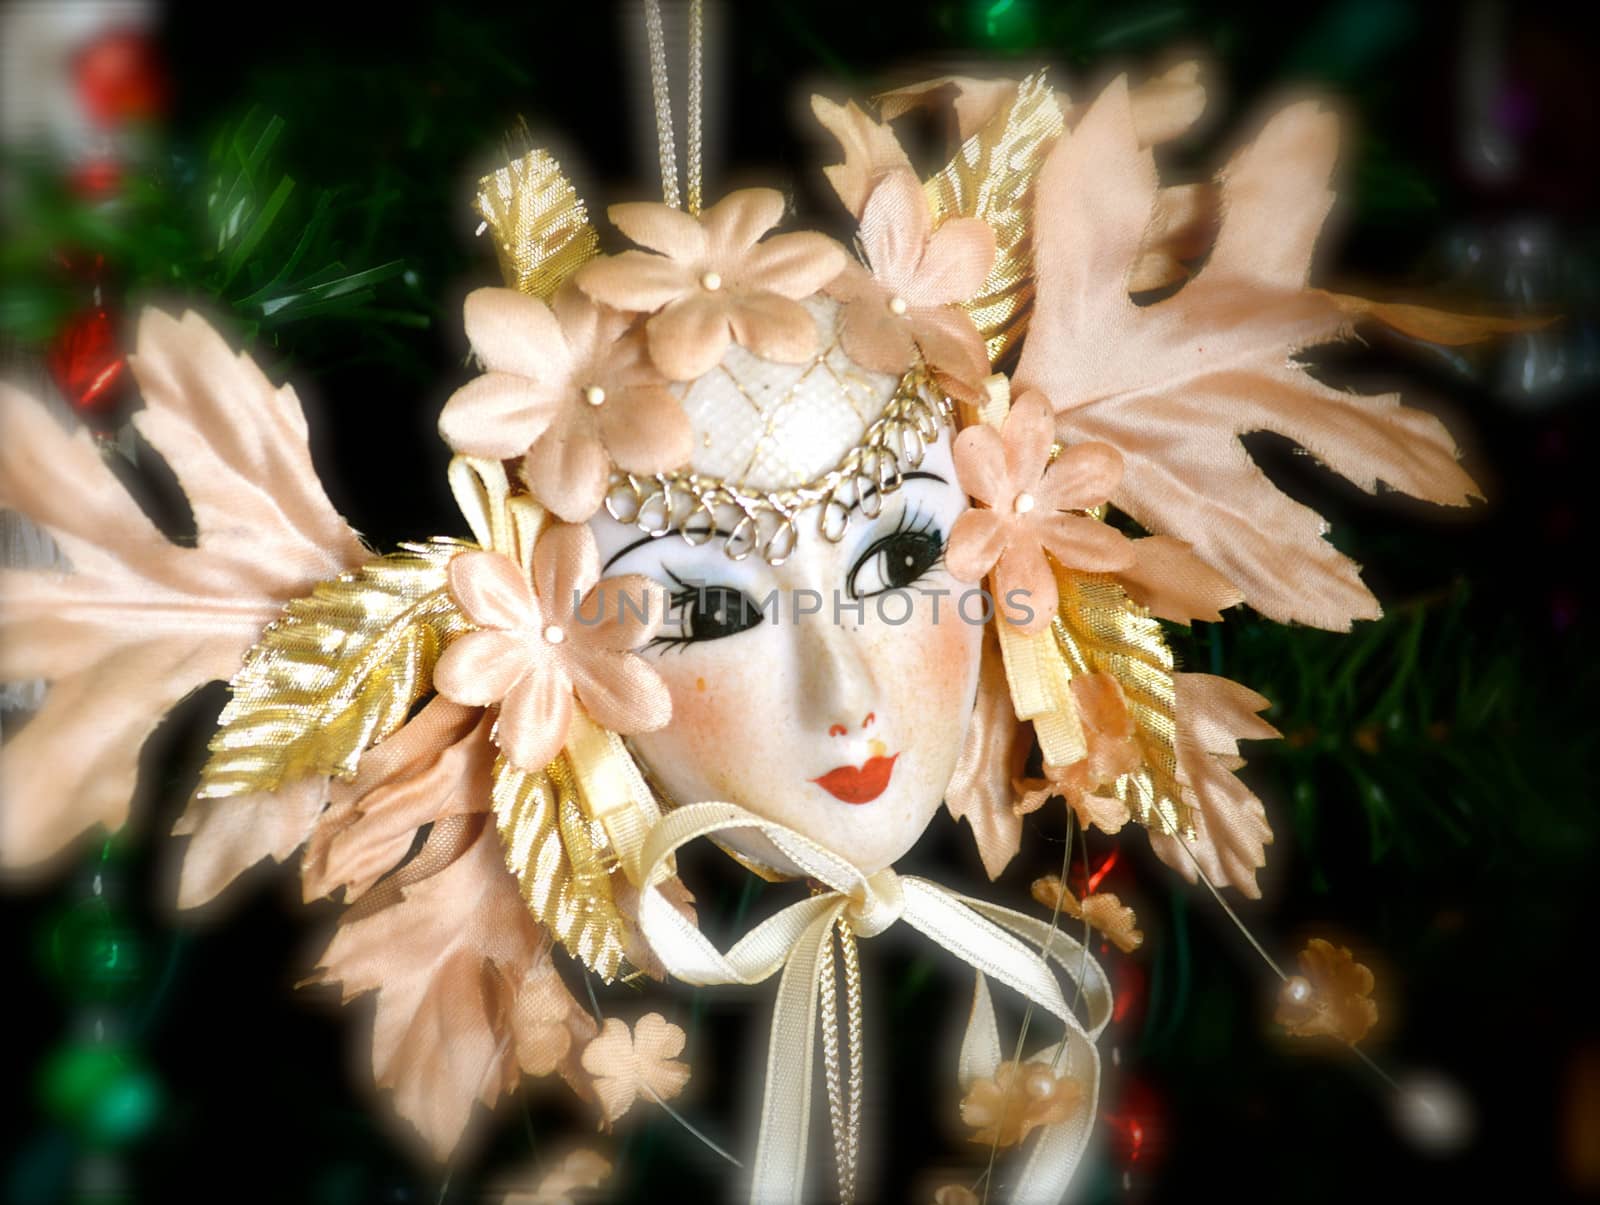 Theatre Mask Ornament by RefocusPhoto